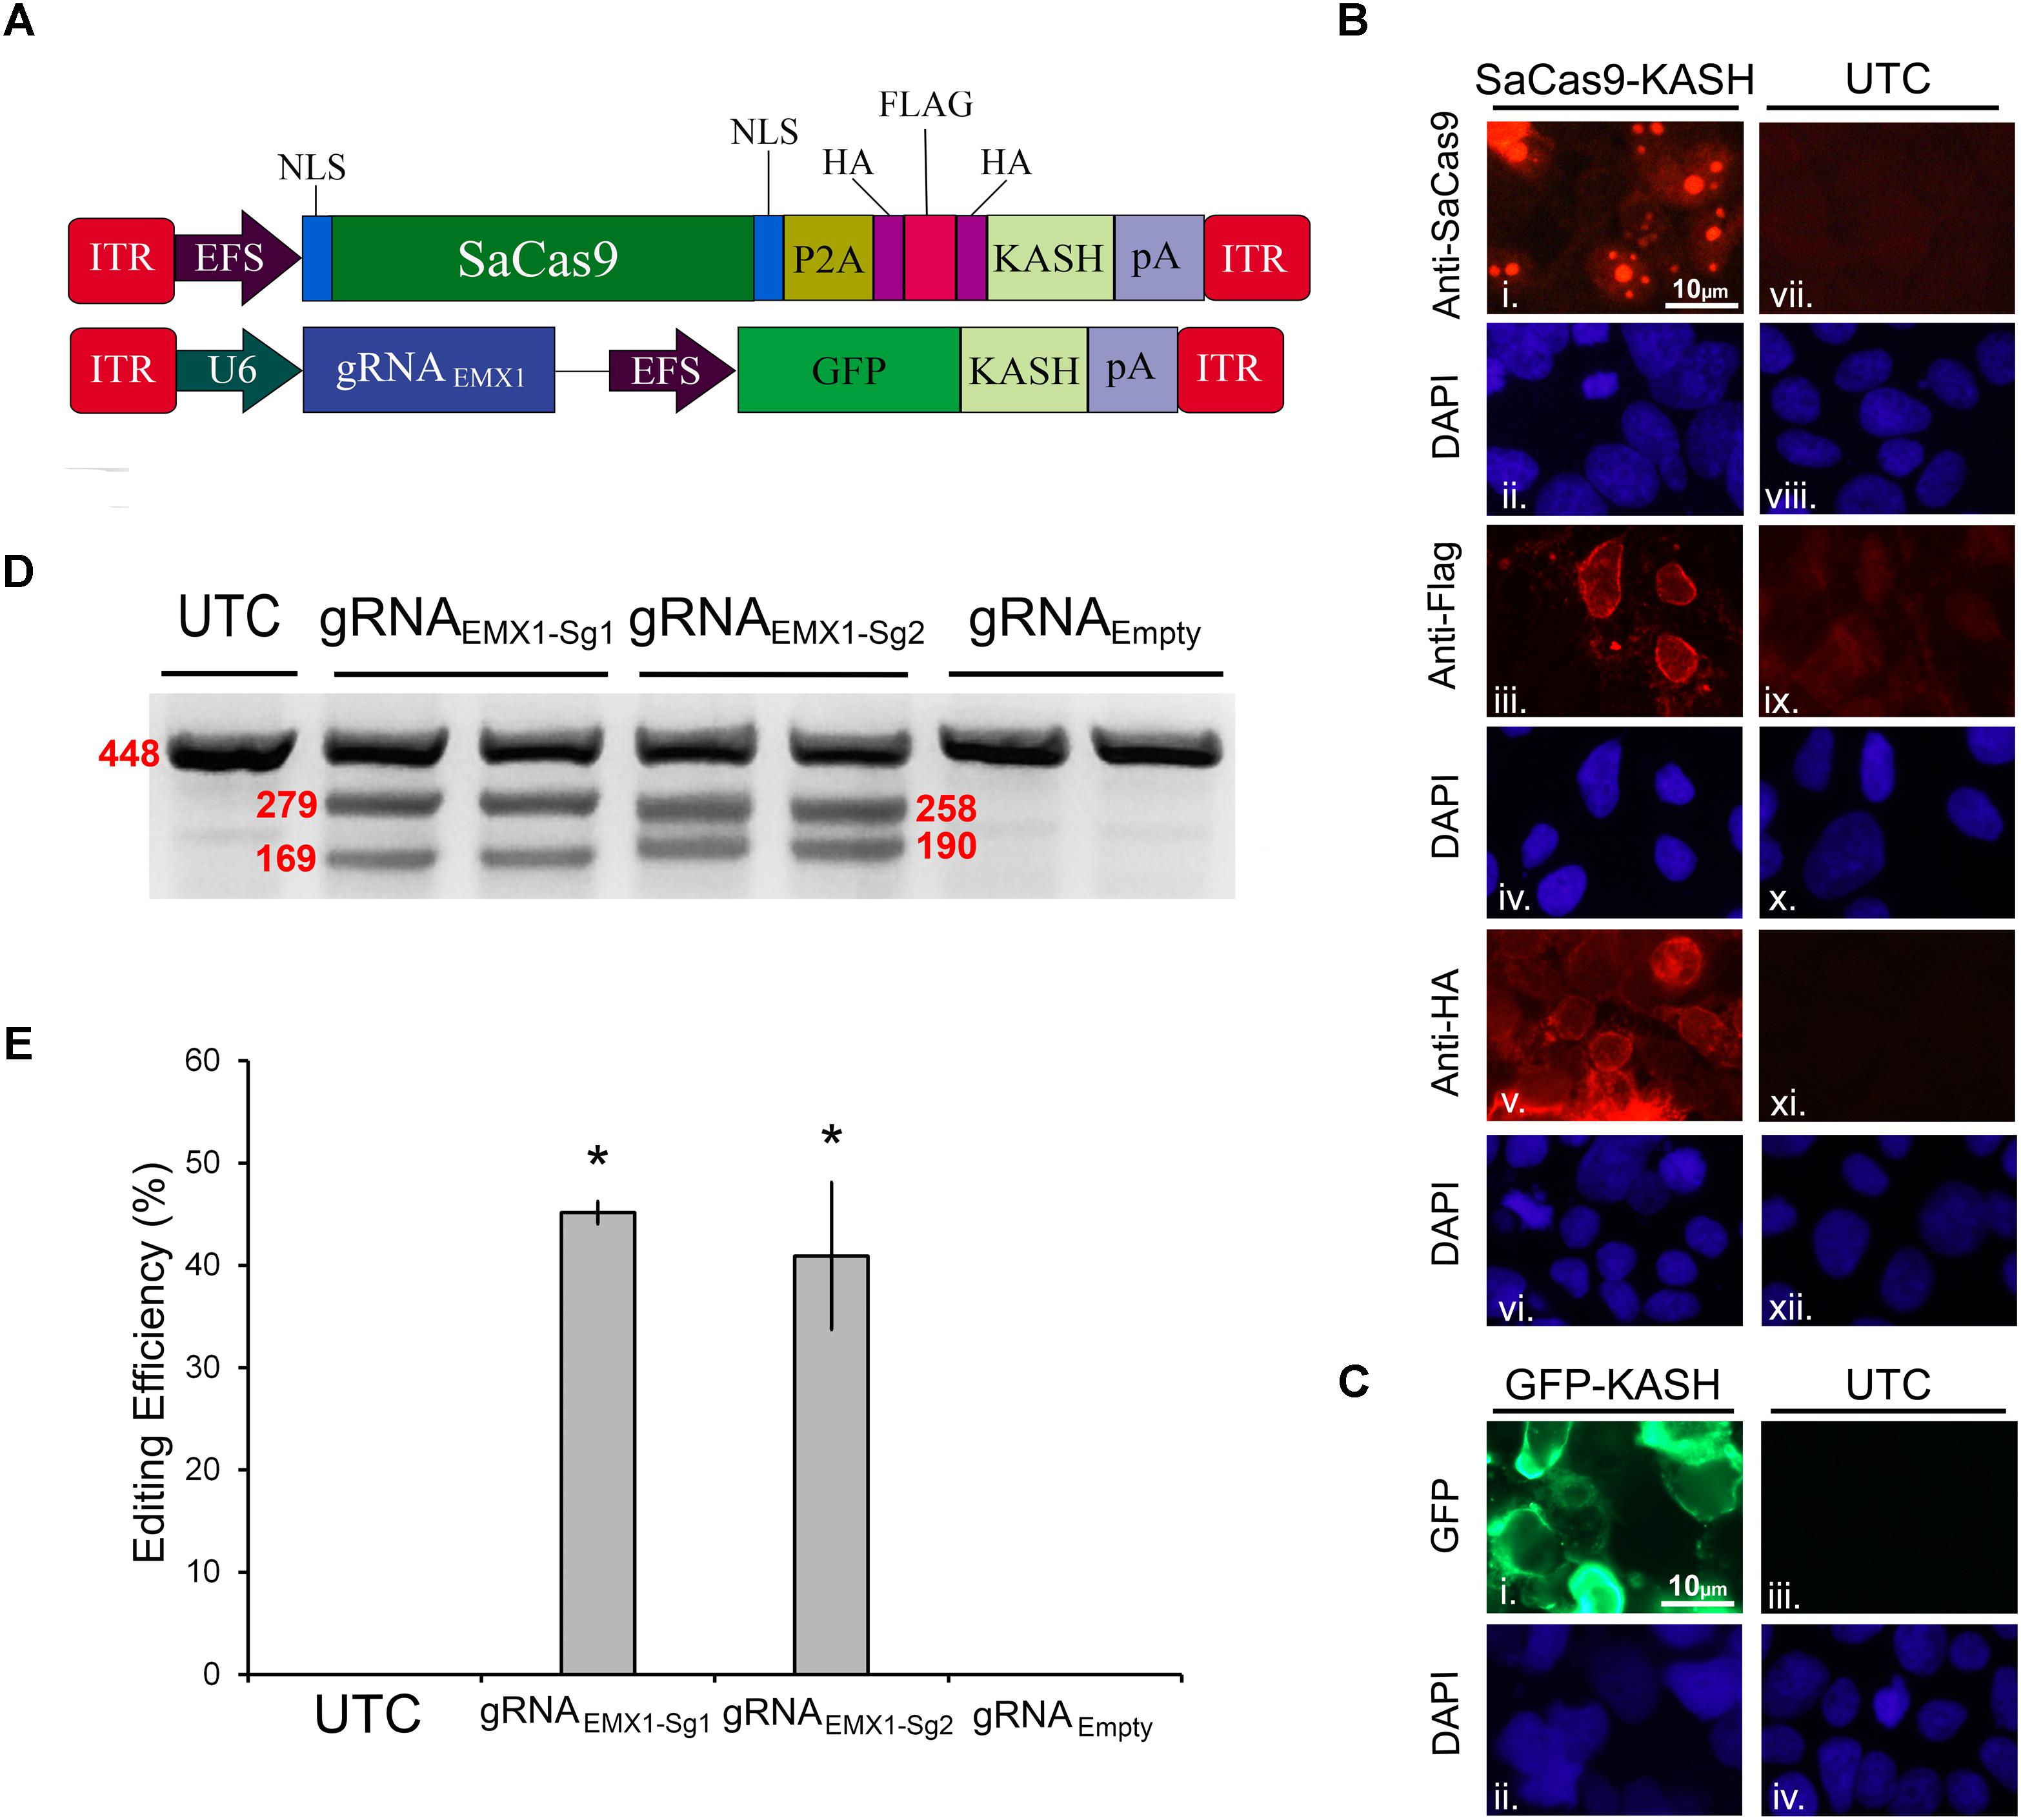 Frontiers  The Development of an AAV-Based CRISPR SaCas9 Genome Editing  System That Can Be Delivered to Neurons in vivo and Regulated via  Doxycycline and Cre-Recombinase